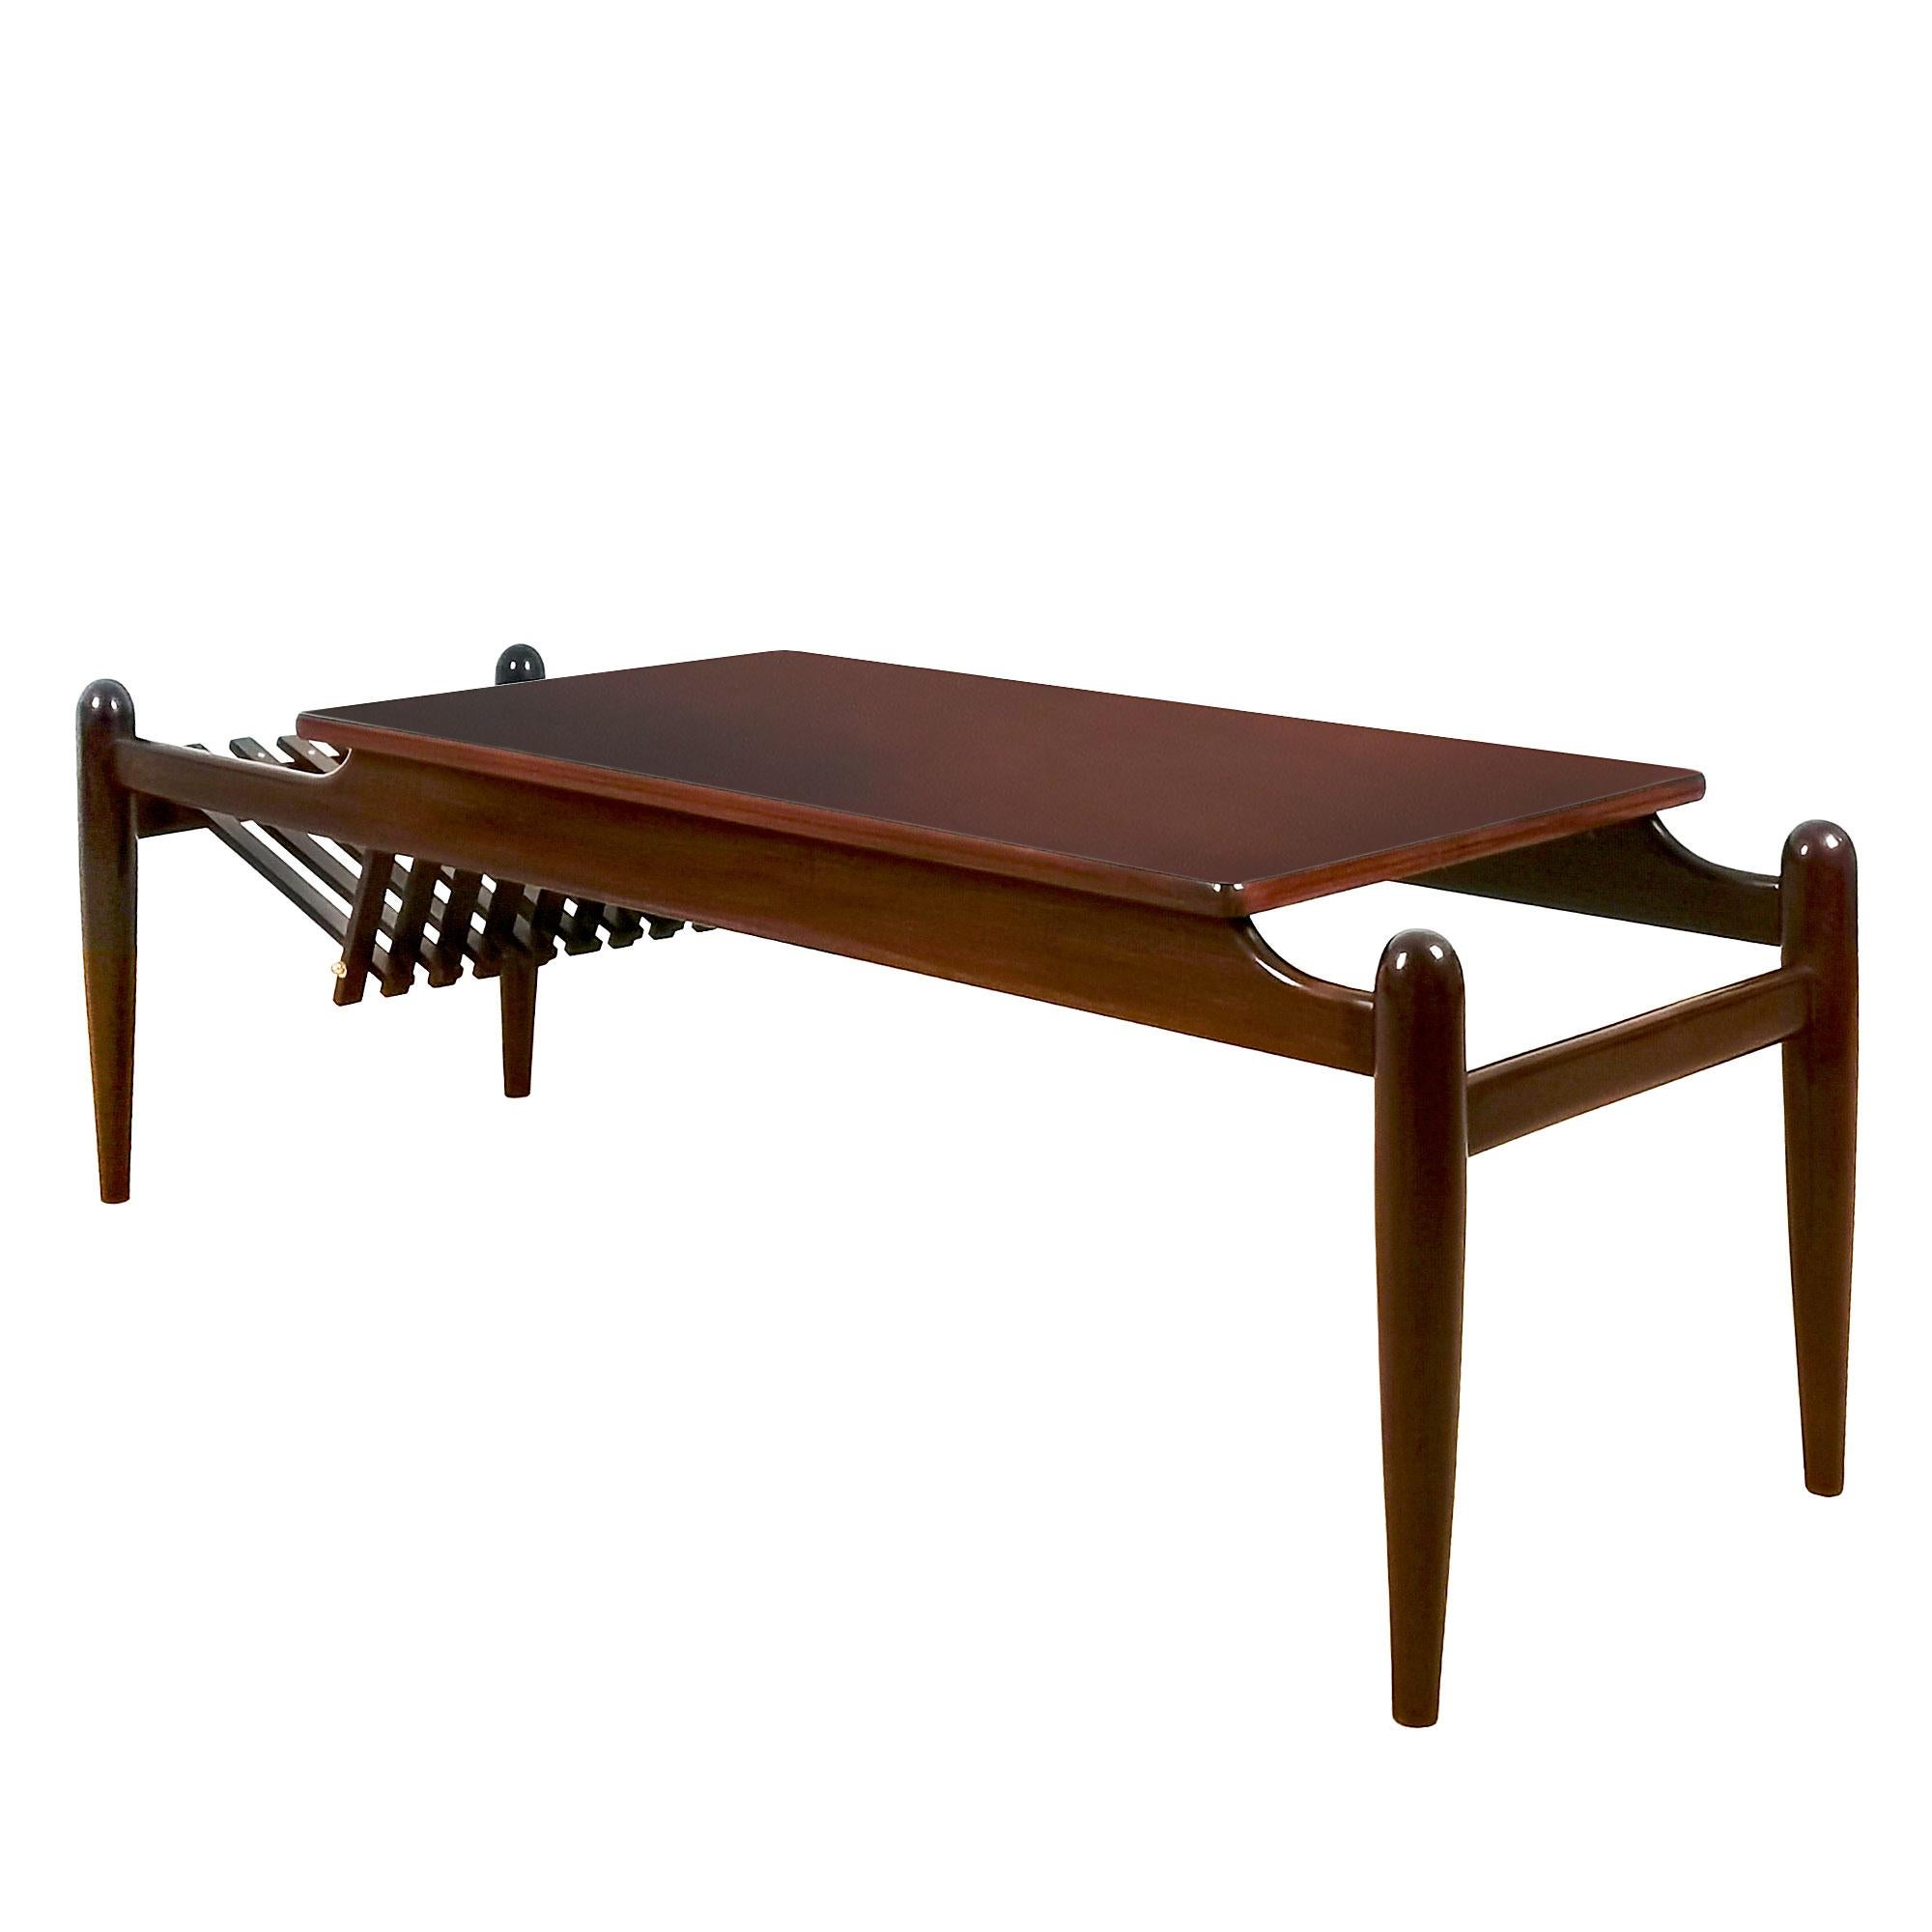 Coffee table with magazine rack, solid mahogany, French polish. Polished brass hardware.
Stamped: GP

Italy c. 1950 

Measurement: top of the table 80 x 45 cm.